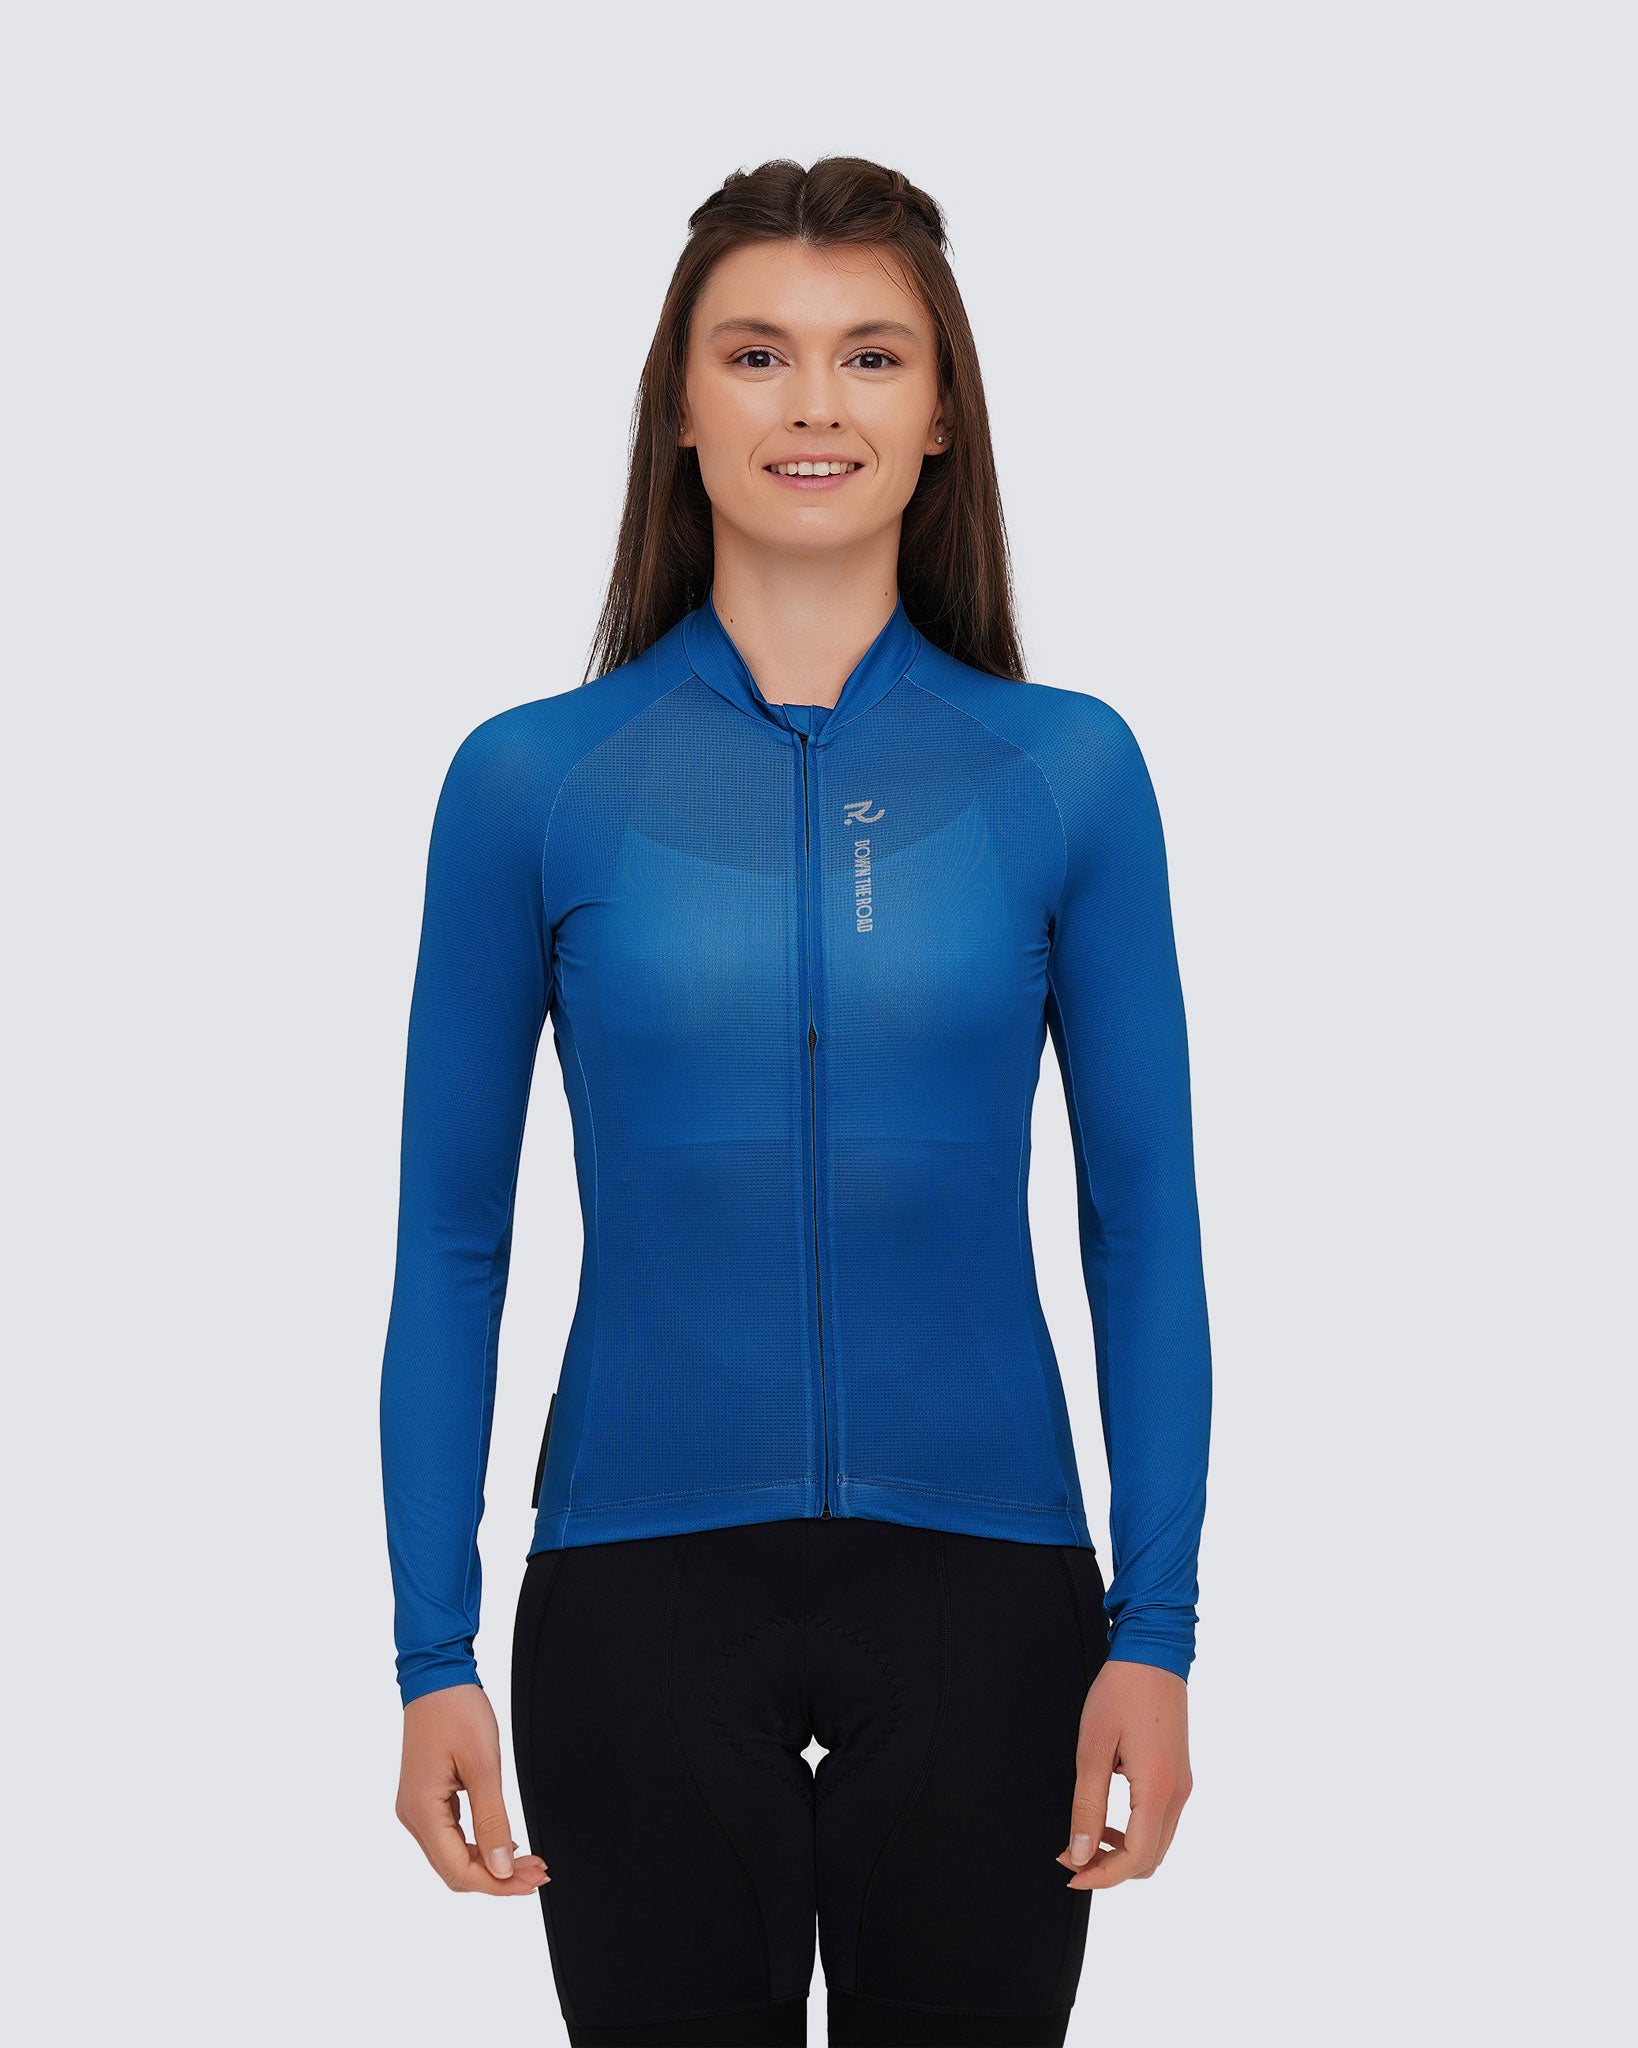 Wavy Teal long sleeve jersey women front view